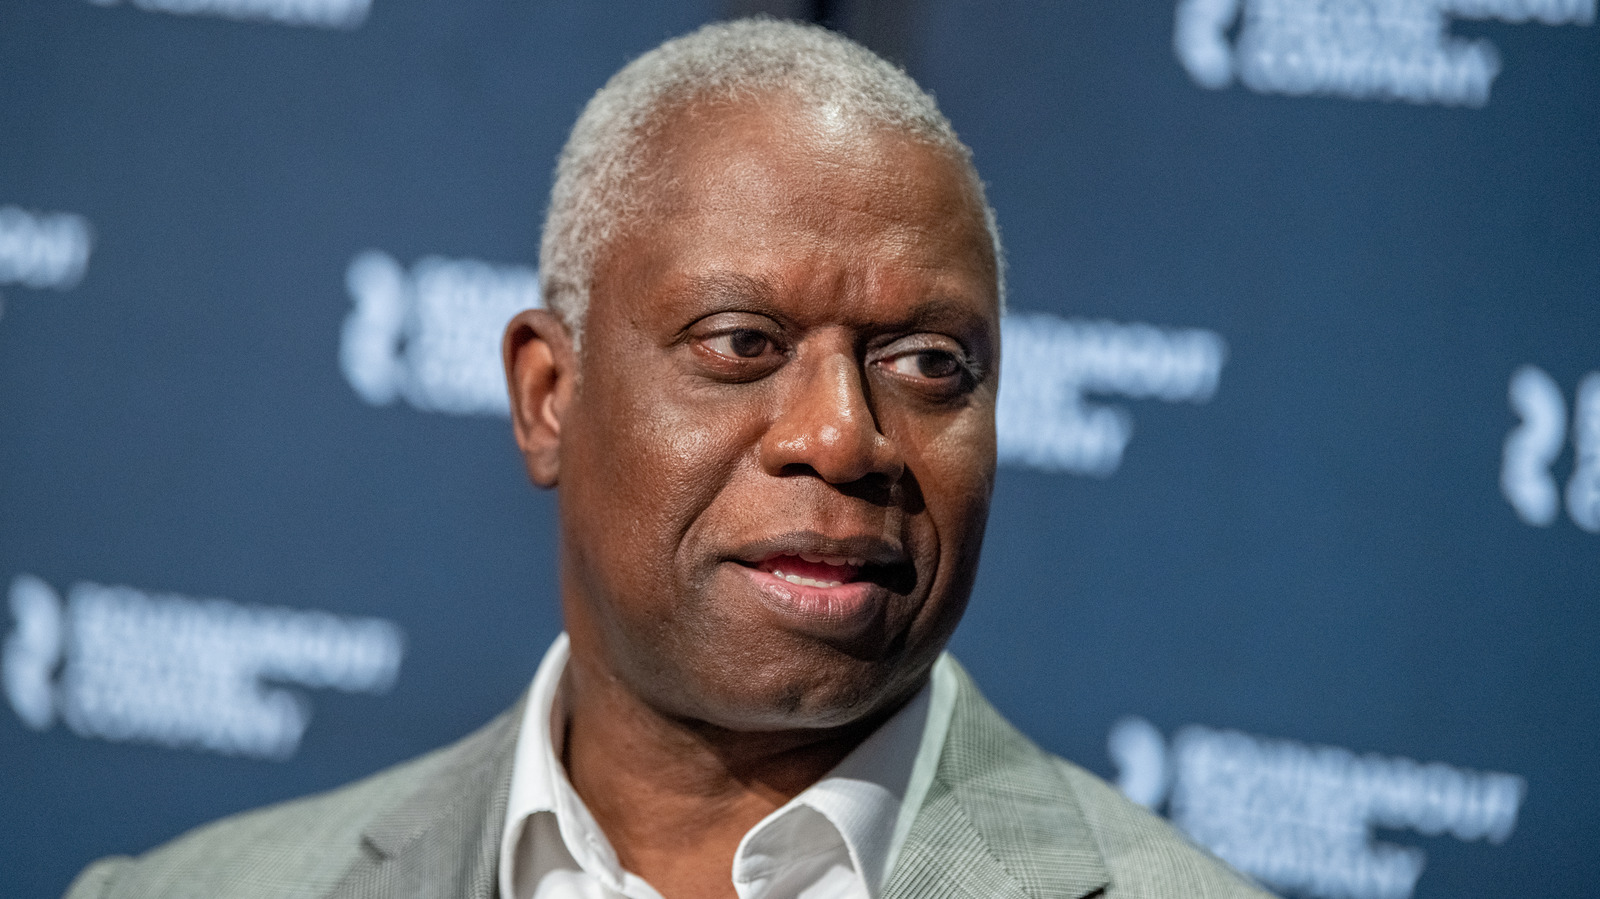 Brooklyn Nine-Nine Star Andre Braugher’s Cause Of Death Explained – Health Digest